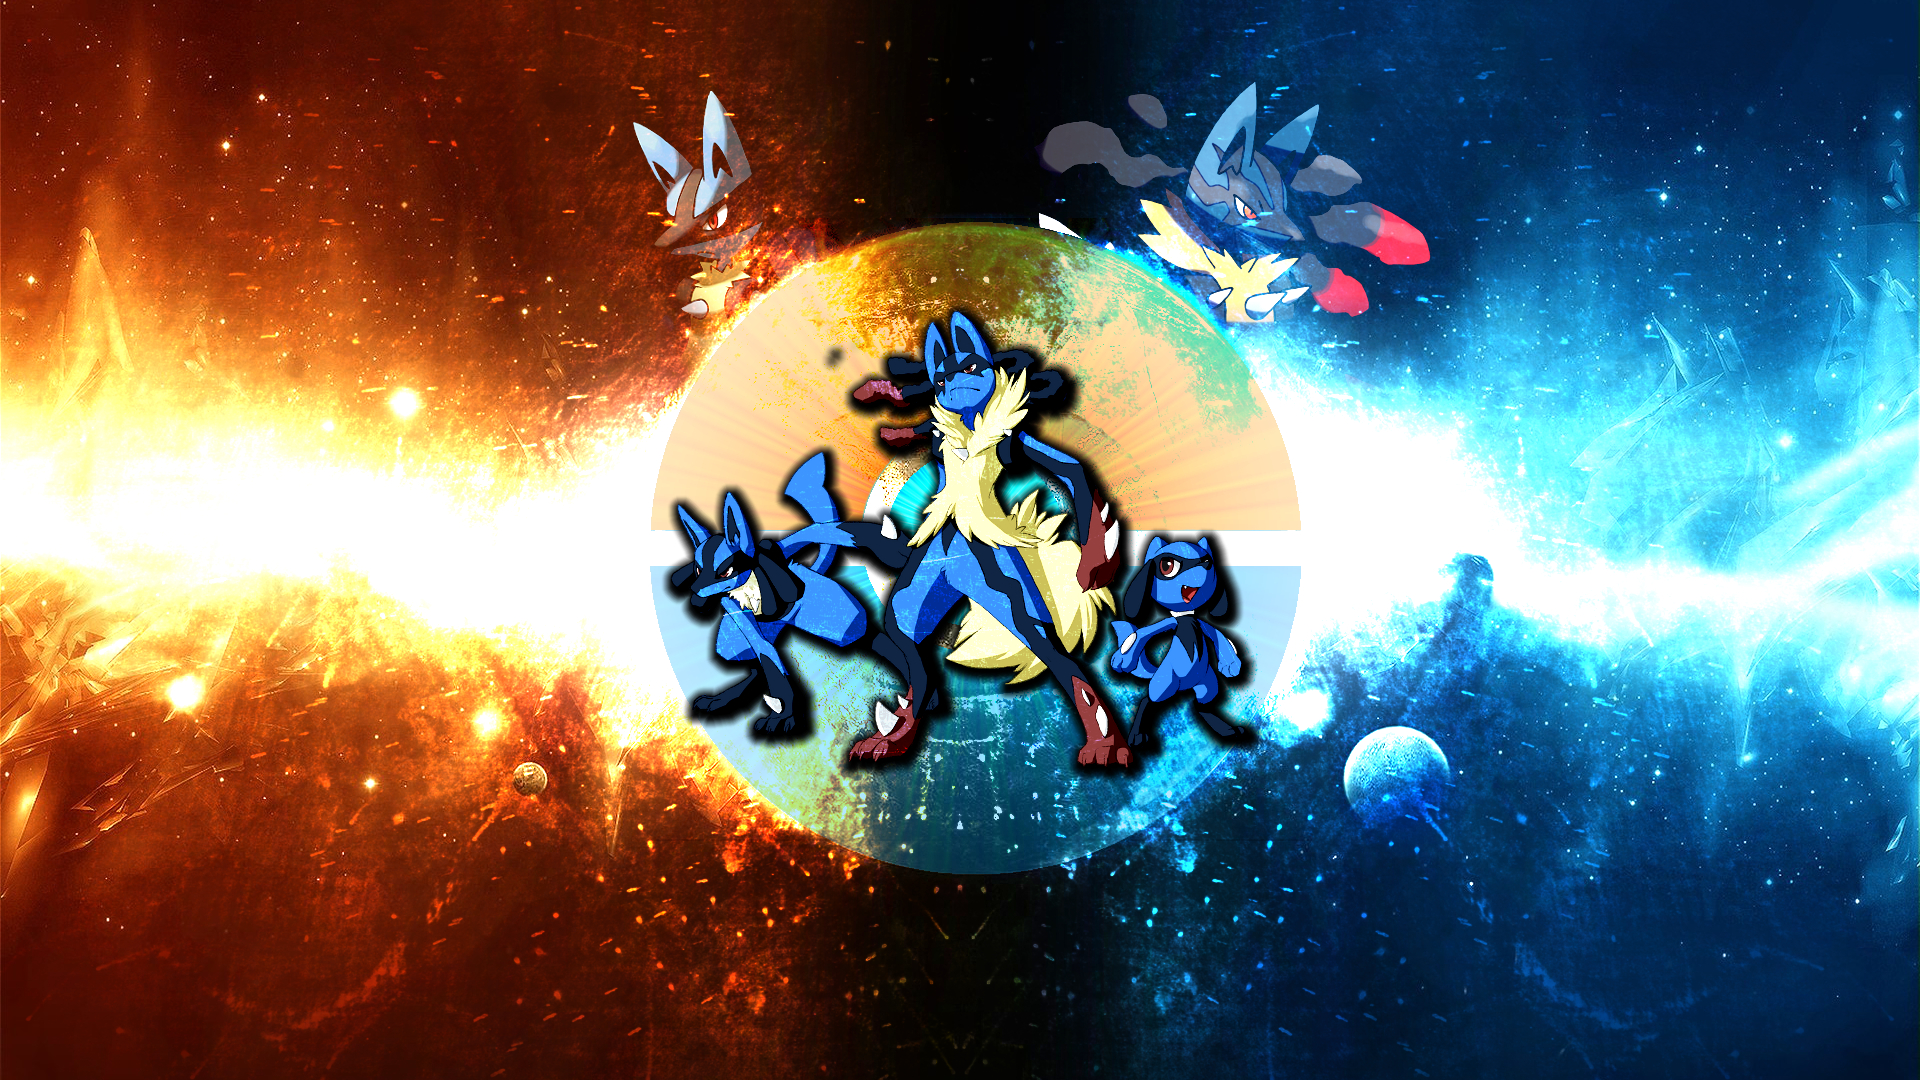 The Lucario Wallpaper by FRUITYNITE on DeviantArt